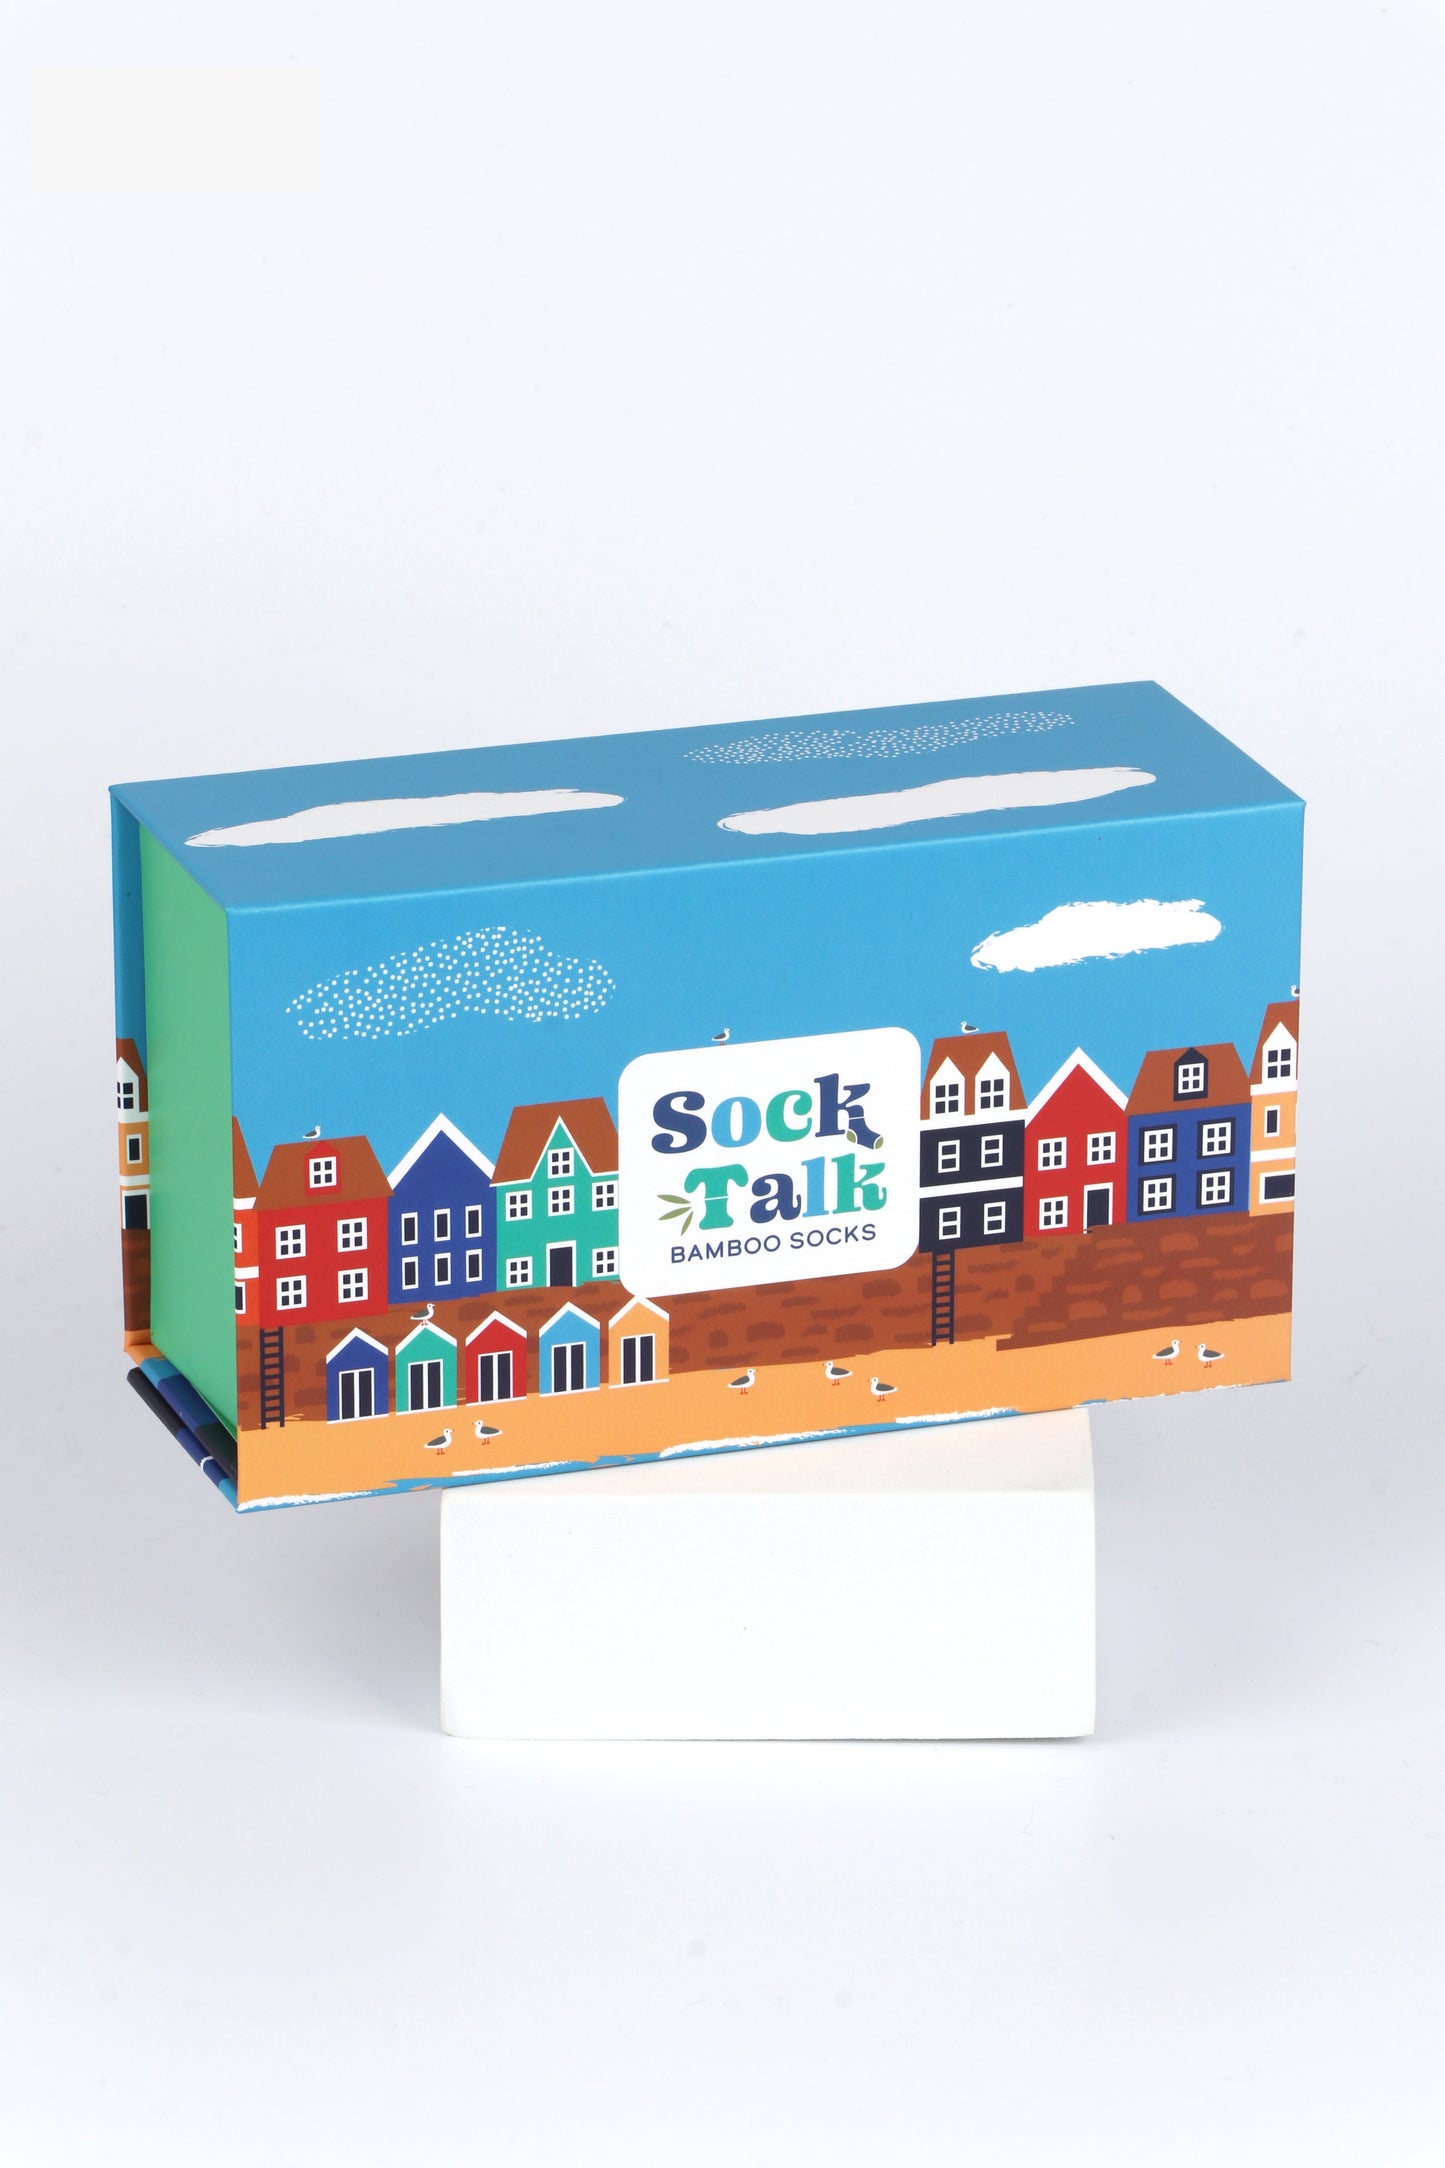 sock talk gift box designed to look like a seaside town with a beach front, beach huts and colourful houses along the boardwalk